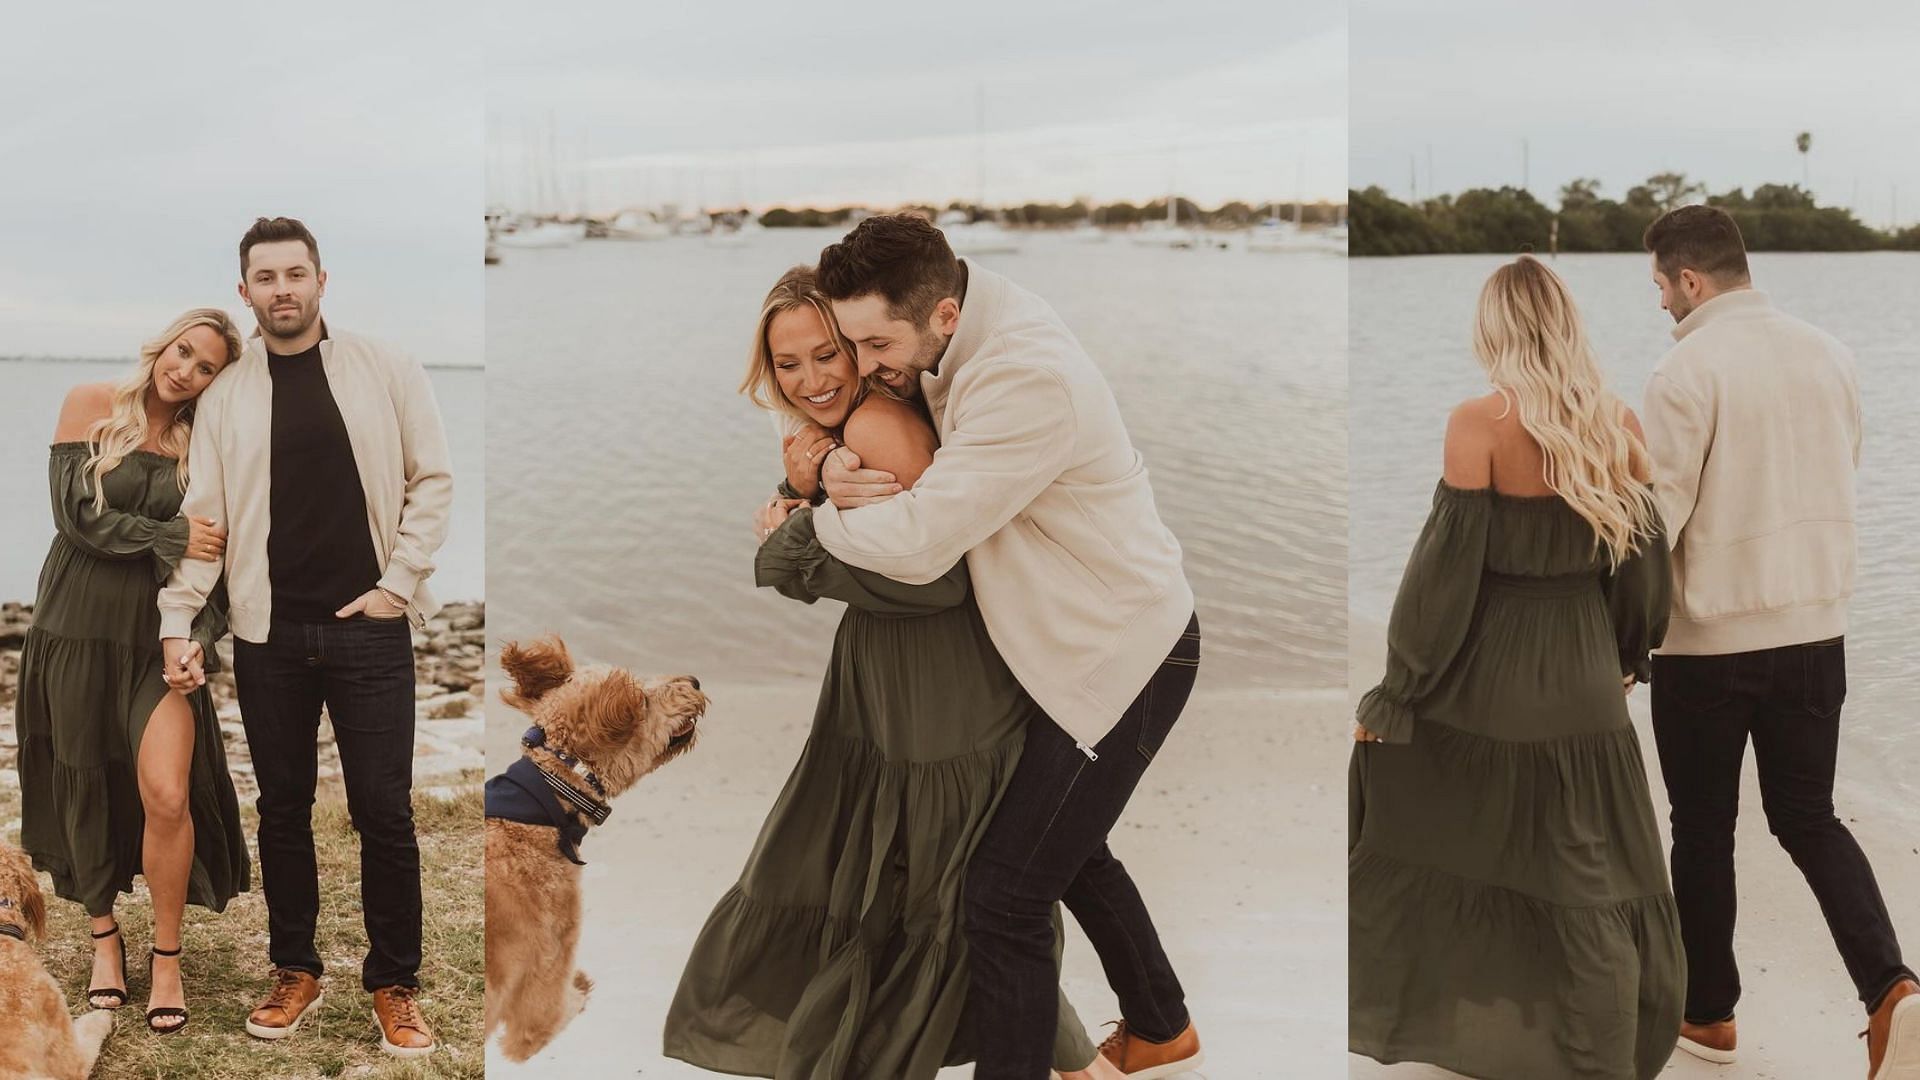 Baker and Emily Mayfield announced their pregnancy. (Image credit: Emily Mayfield on Instagram)